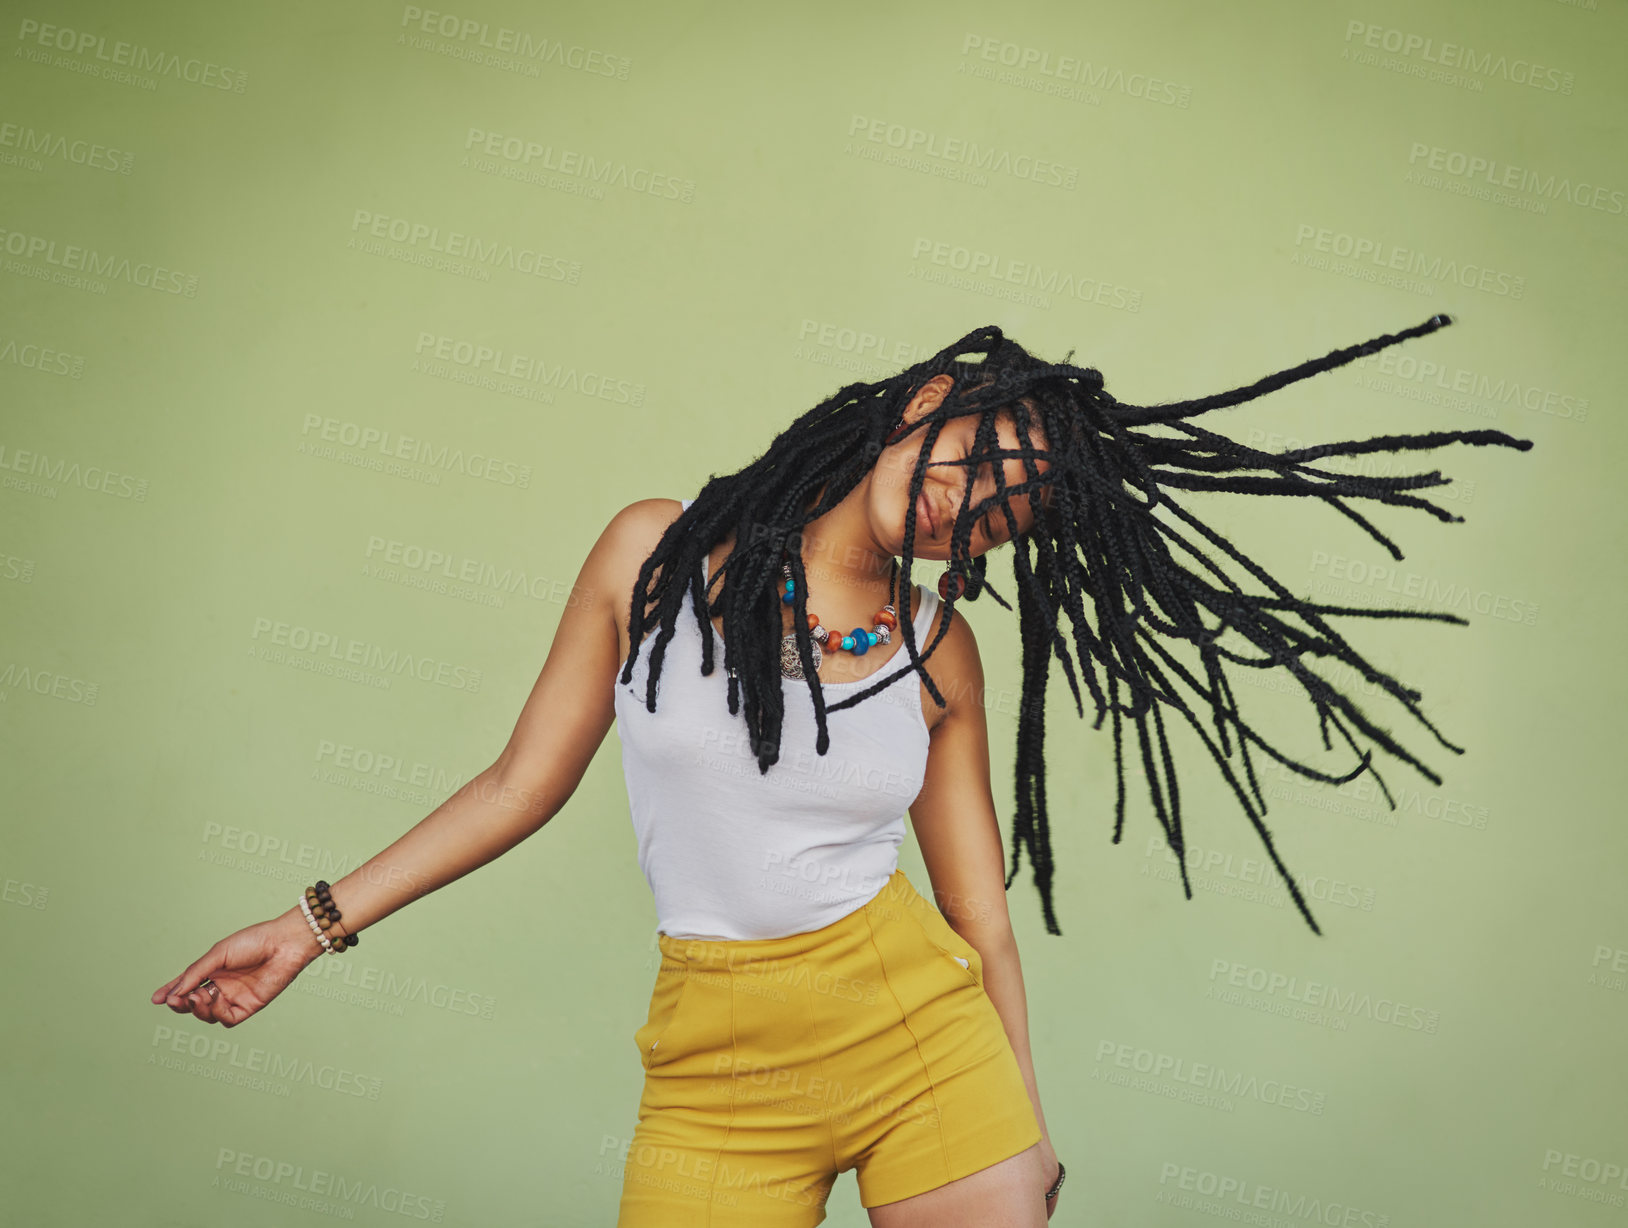 Buy stock photo Shot of an attractive young woman dancing against a green background